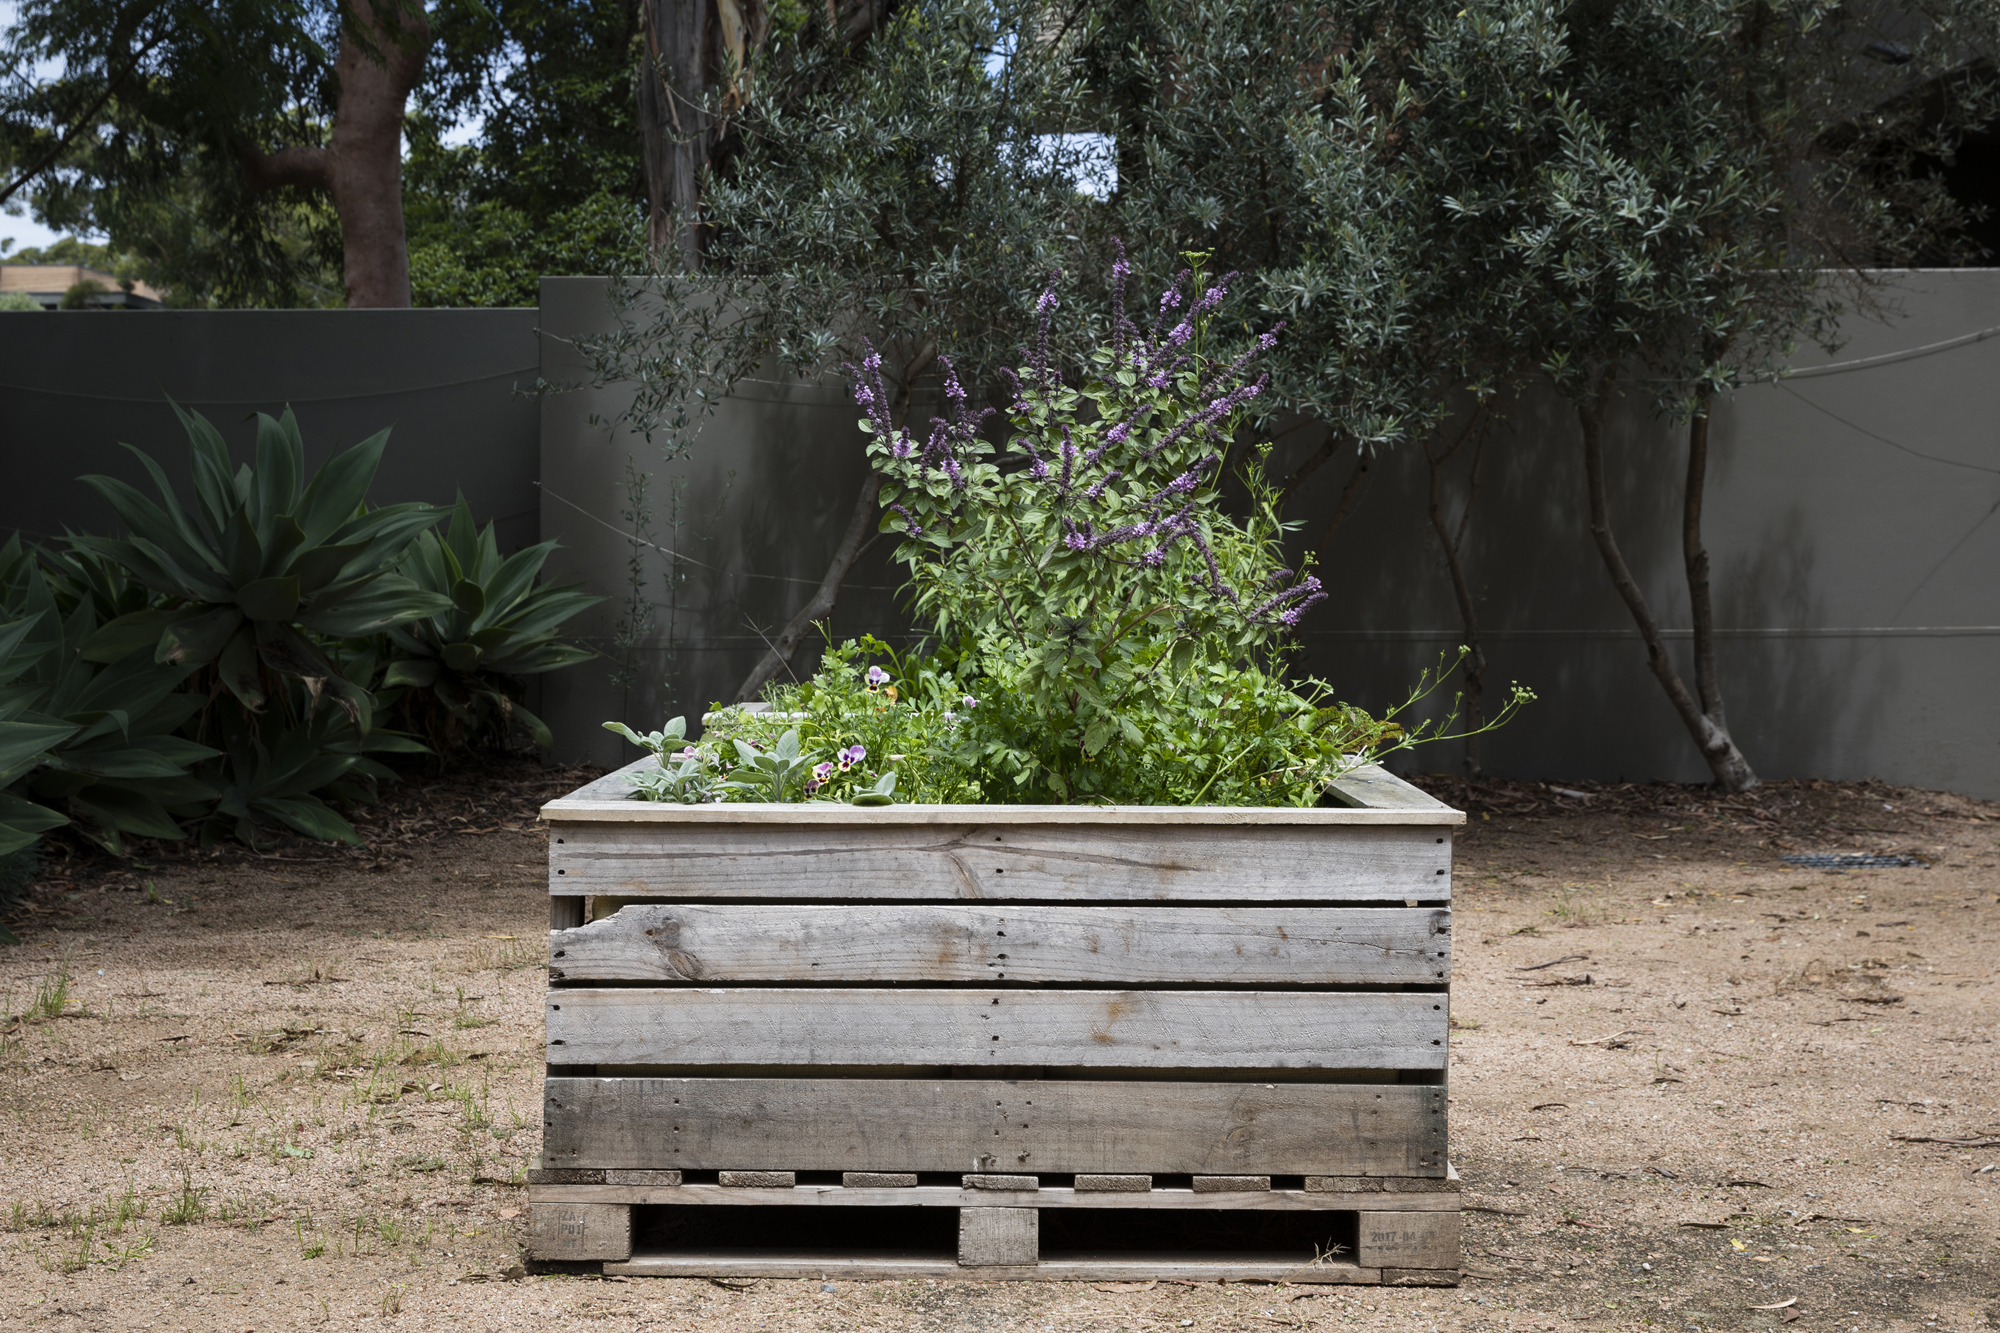 A raised garden bed made from timber palettes sitting in the middle of a courtyard, There is low green foliage and a small purple flowering shrub growing in it.